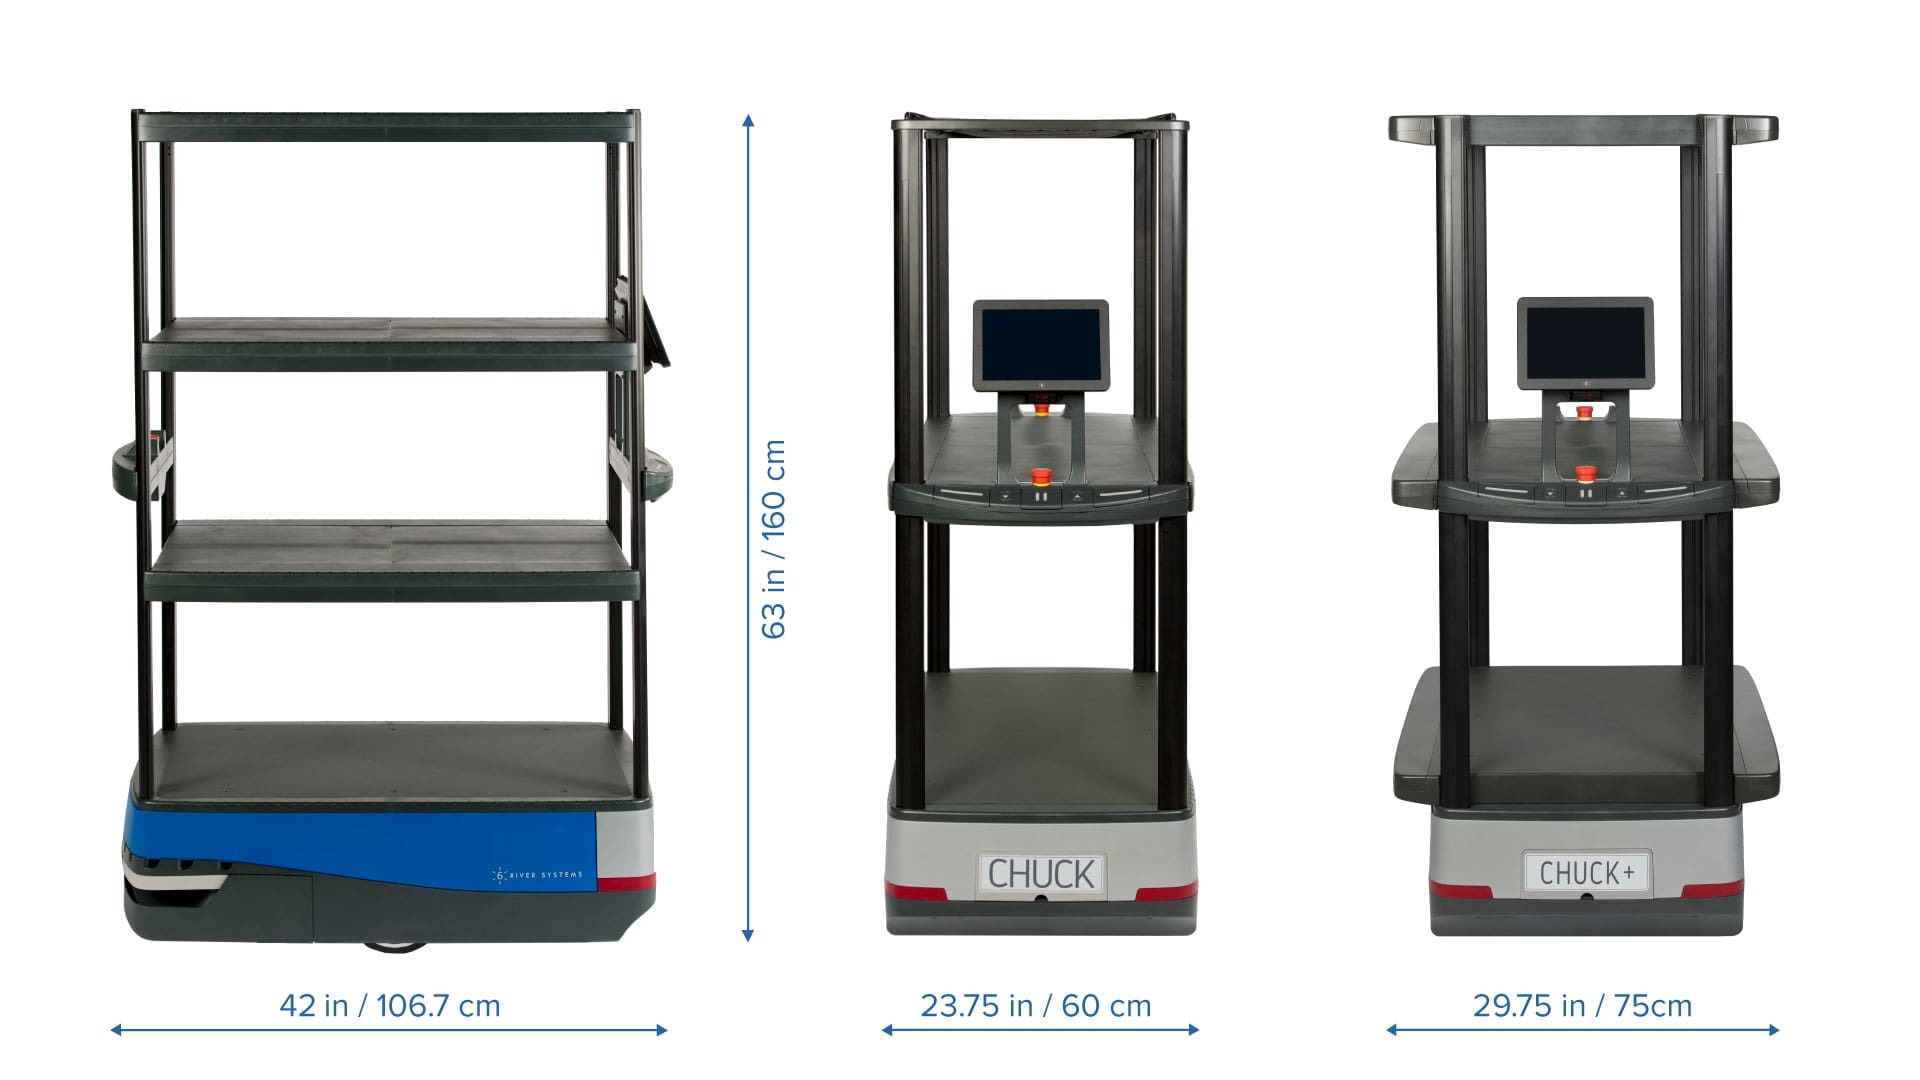 River Systems Cobot – “Chuck” available in different configurations